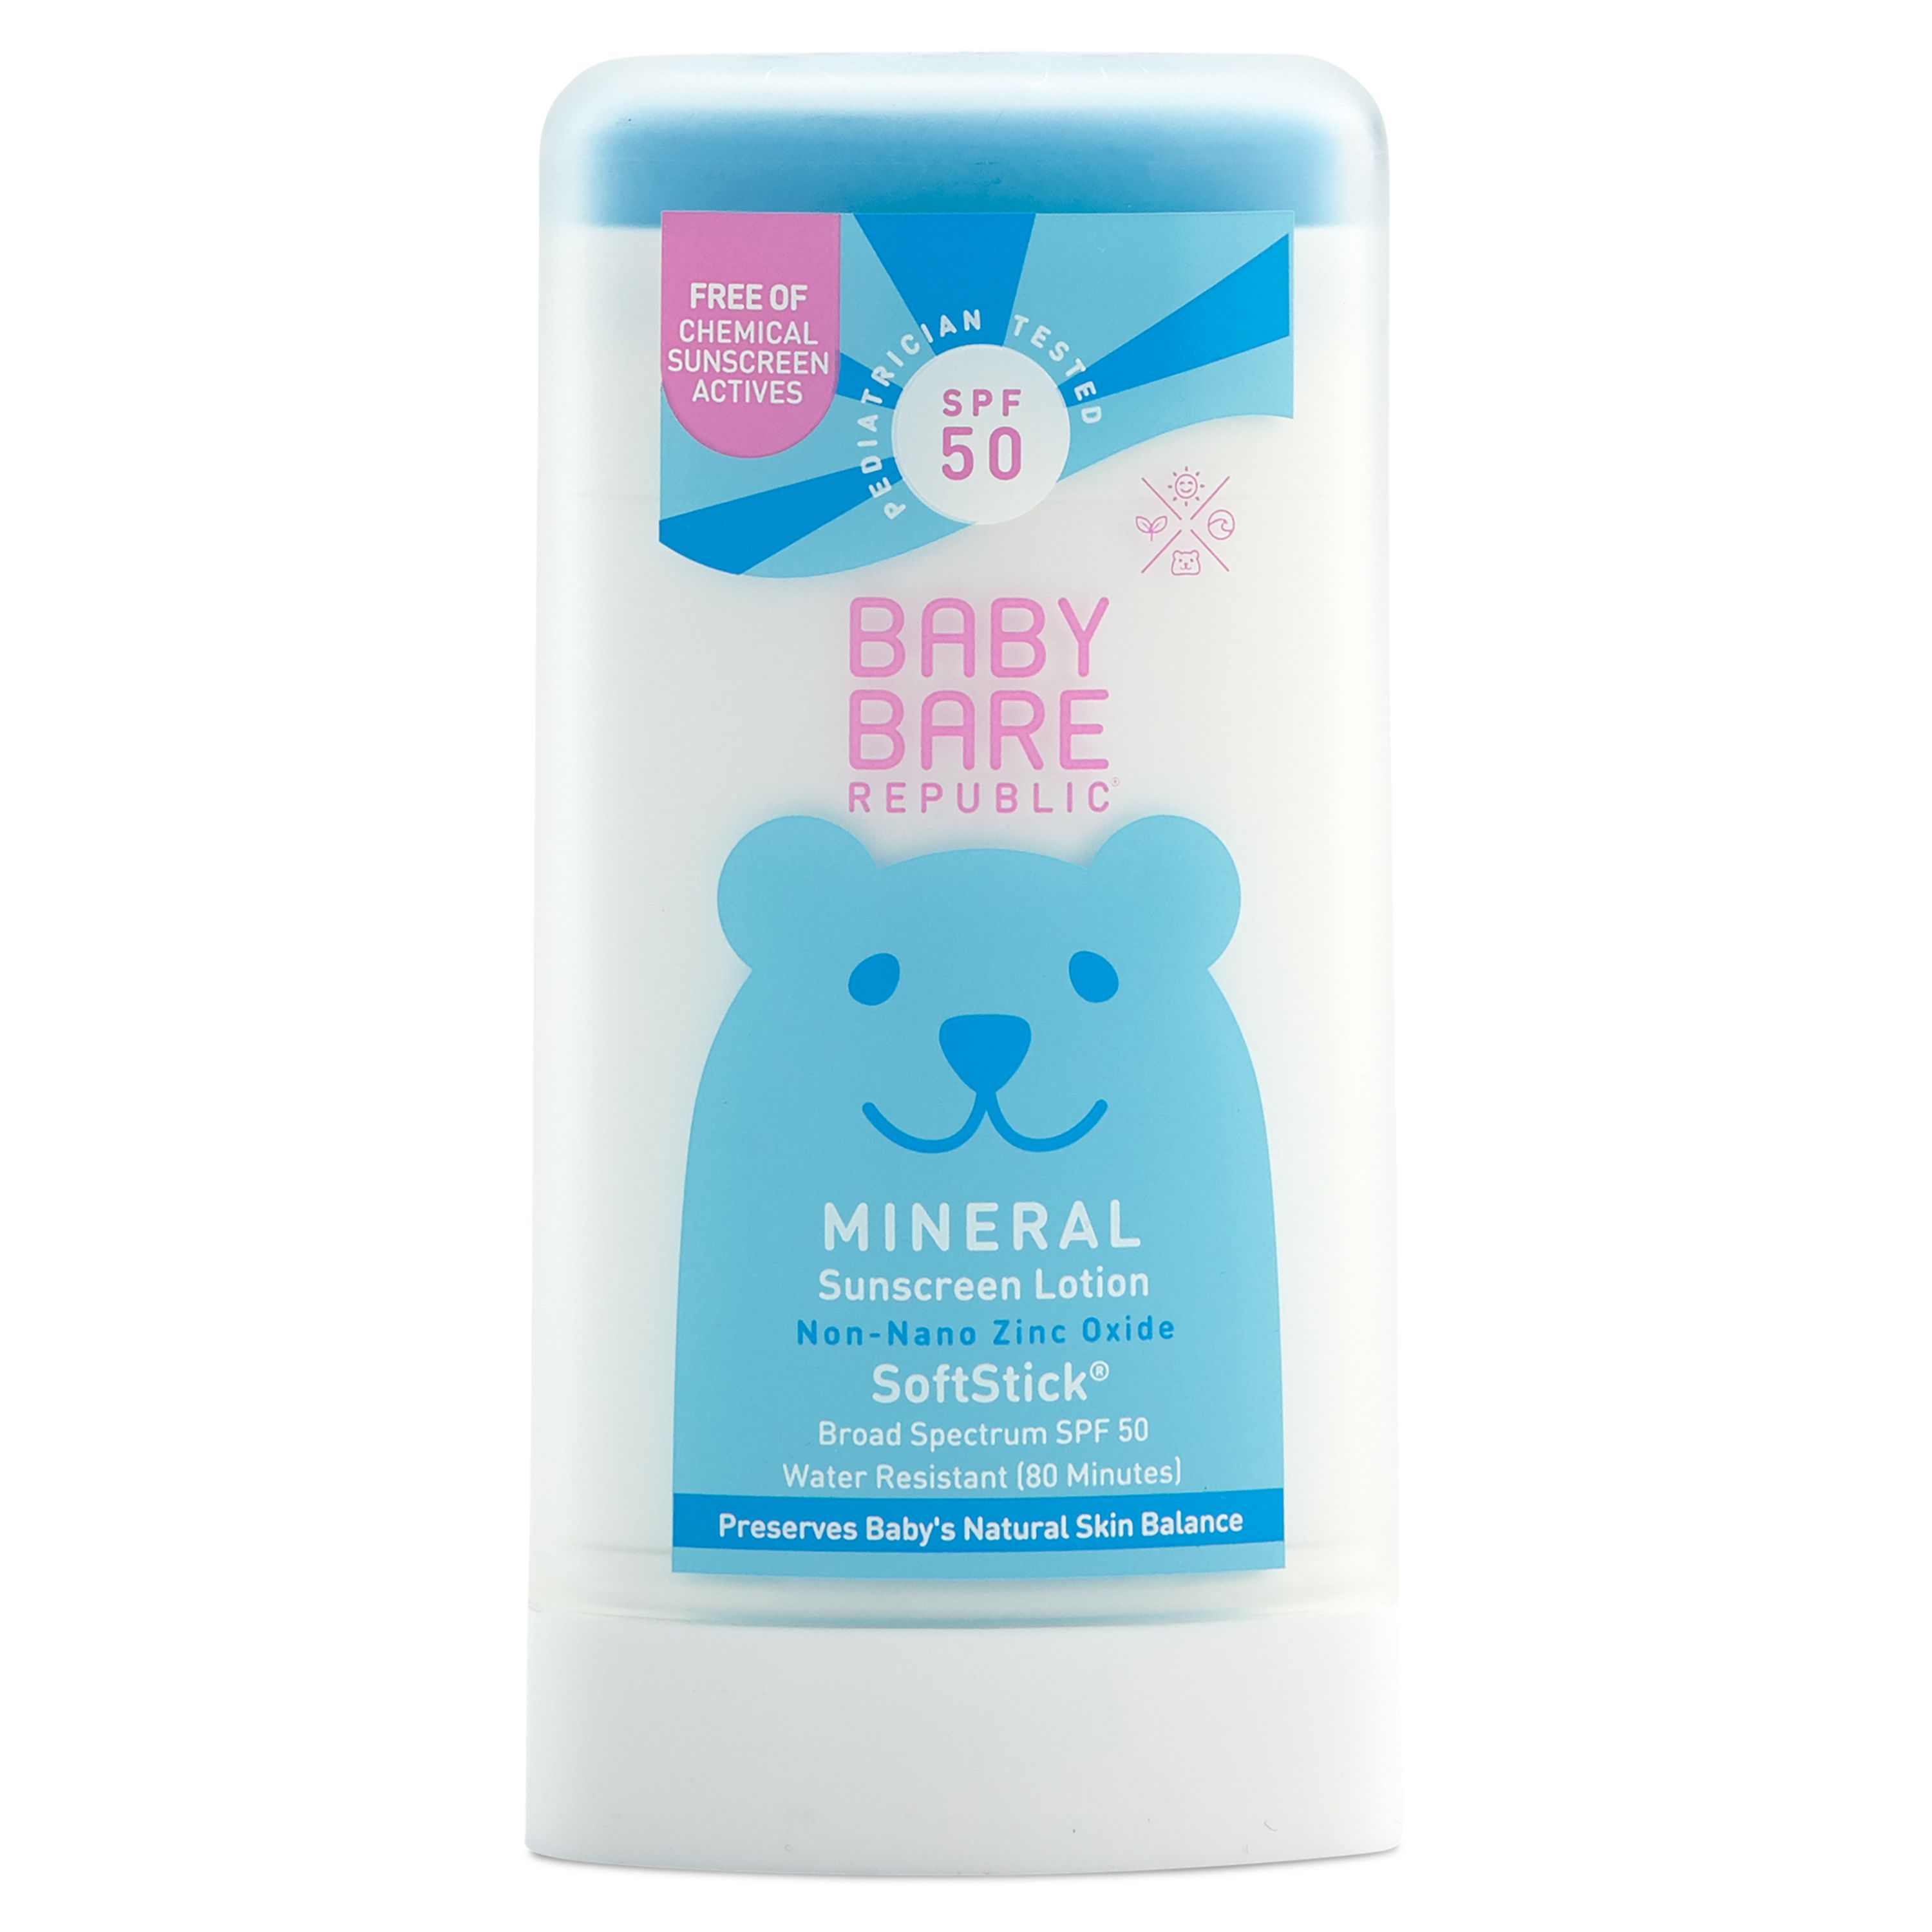 Bare Republic Mineral Baby Sunscreen Face & Body Soft Stick, Unscented, SPF 50 - .9 oz